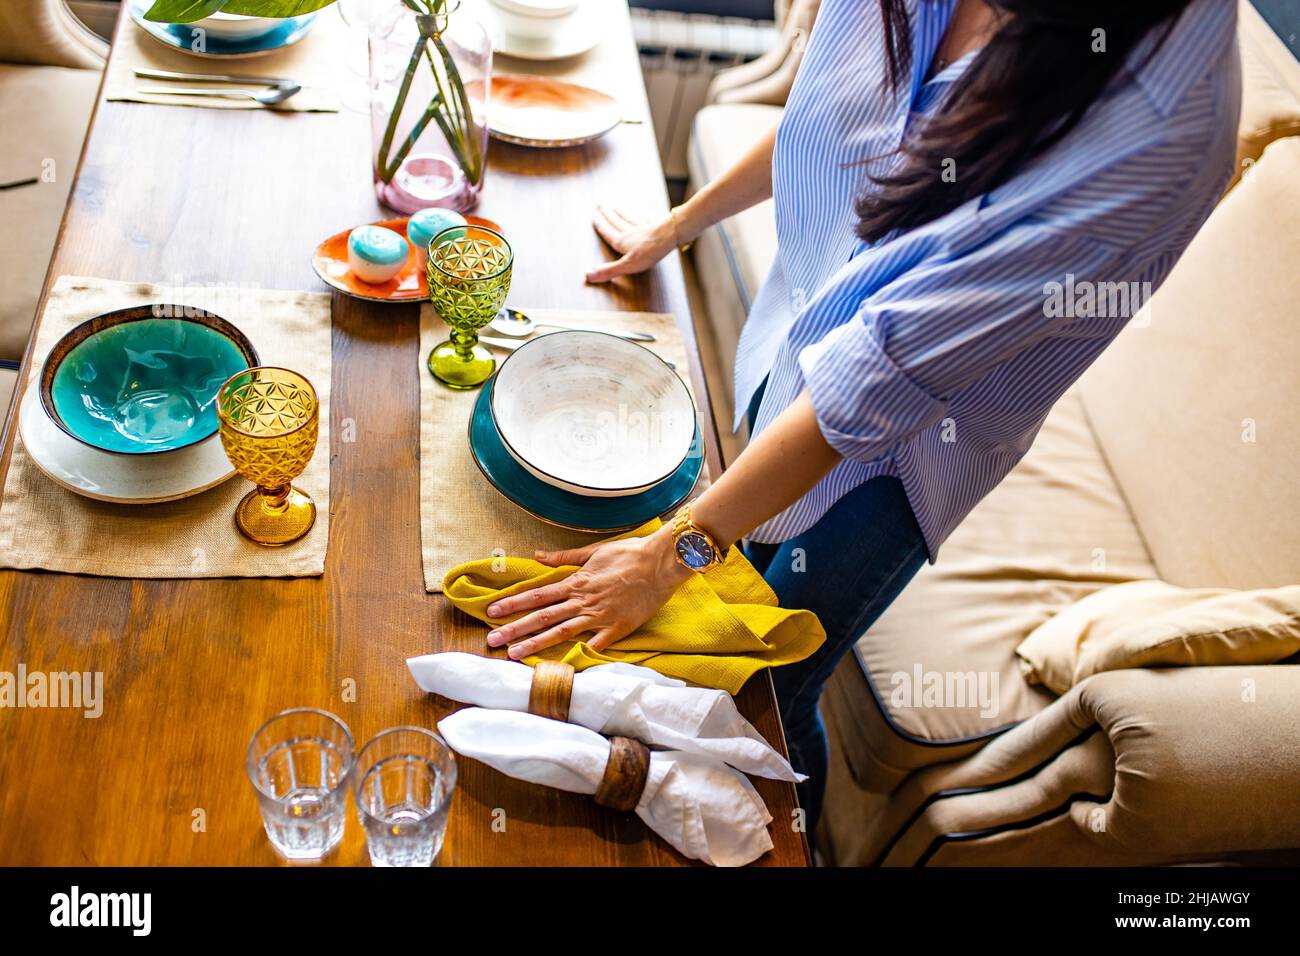 designer etiquette teacher showing how correct set a dishes in a restaurant Stock Photo